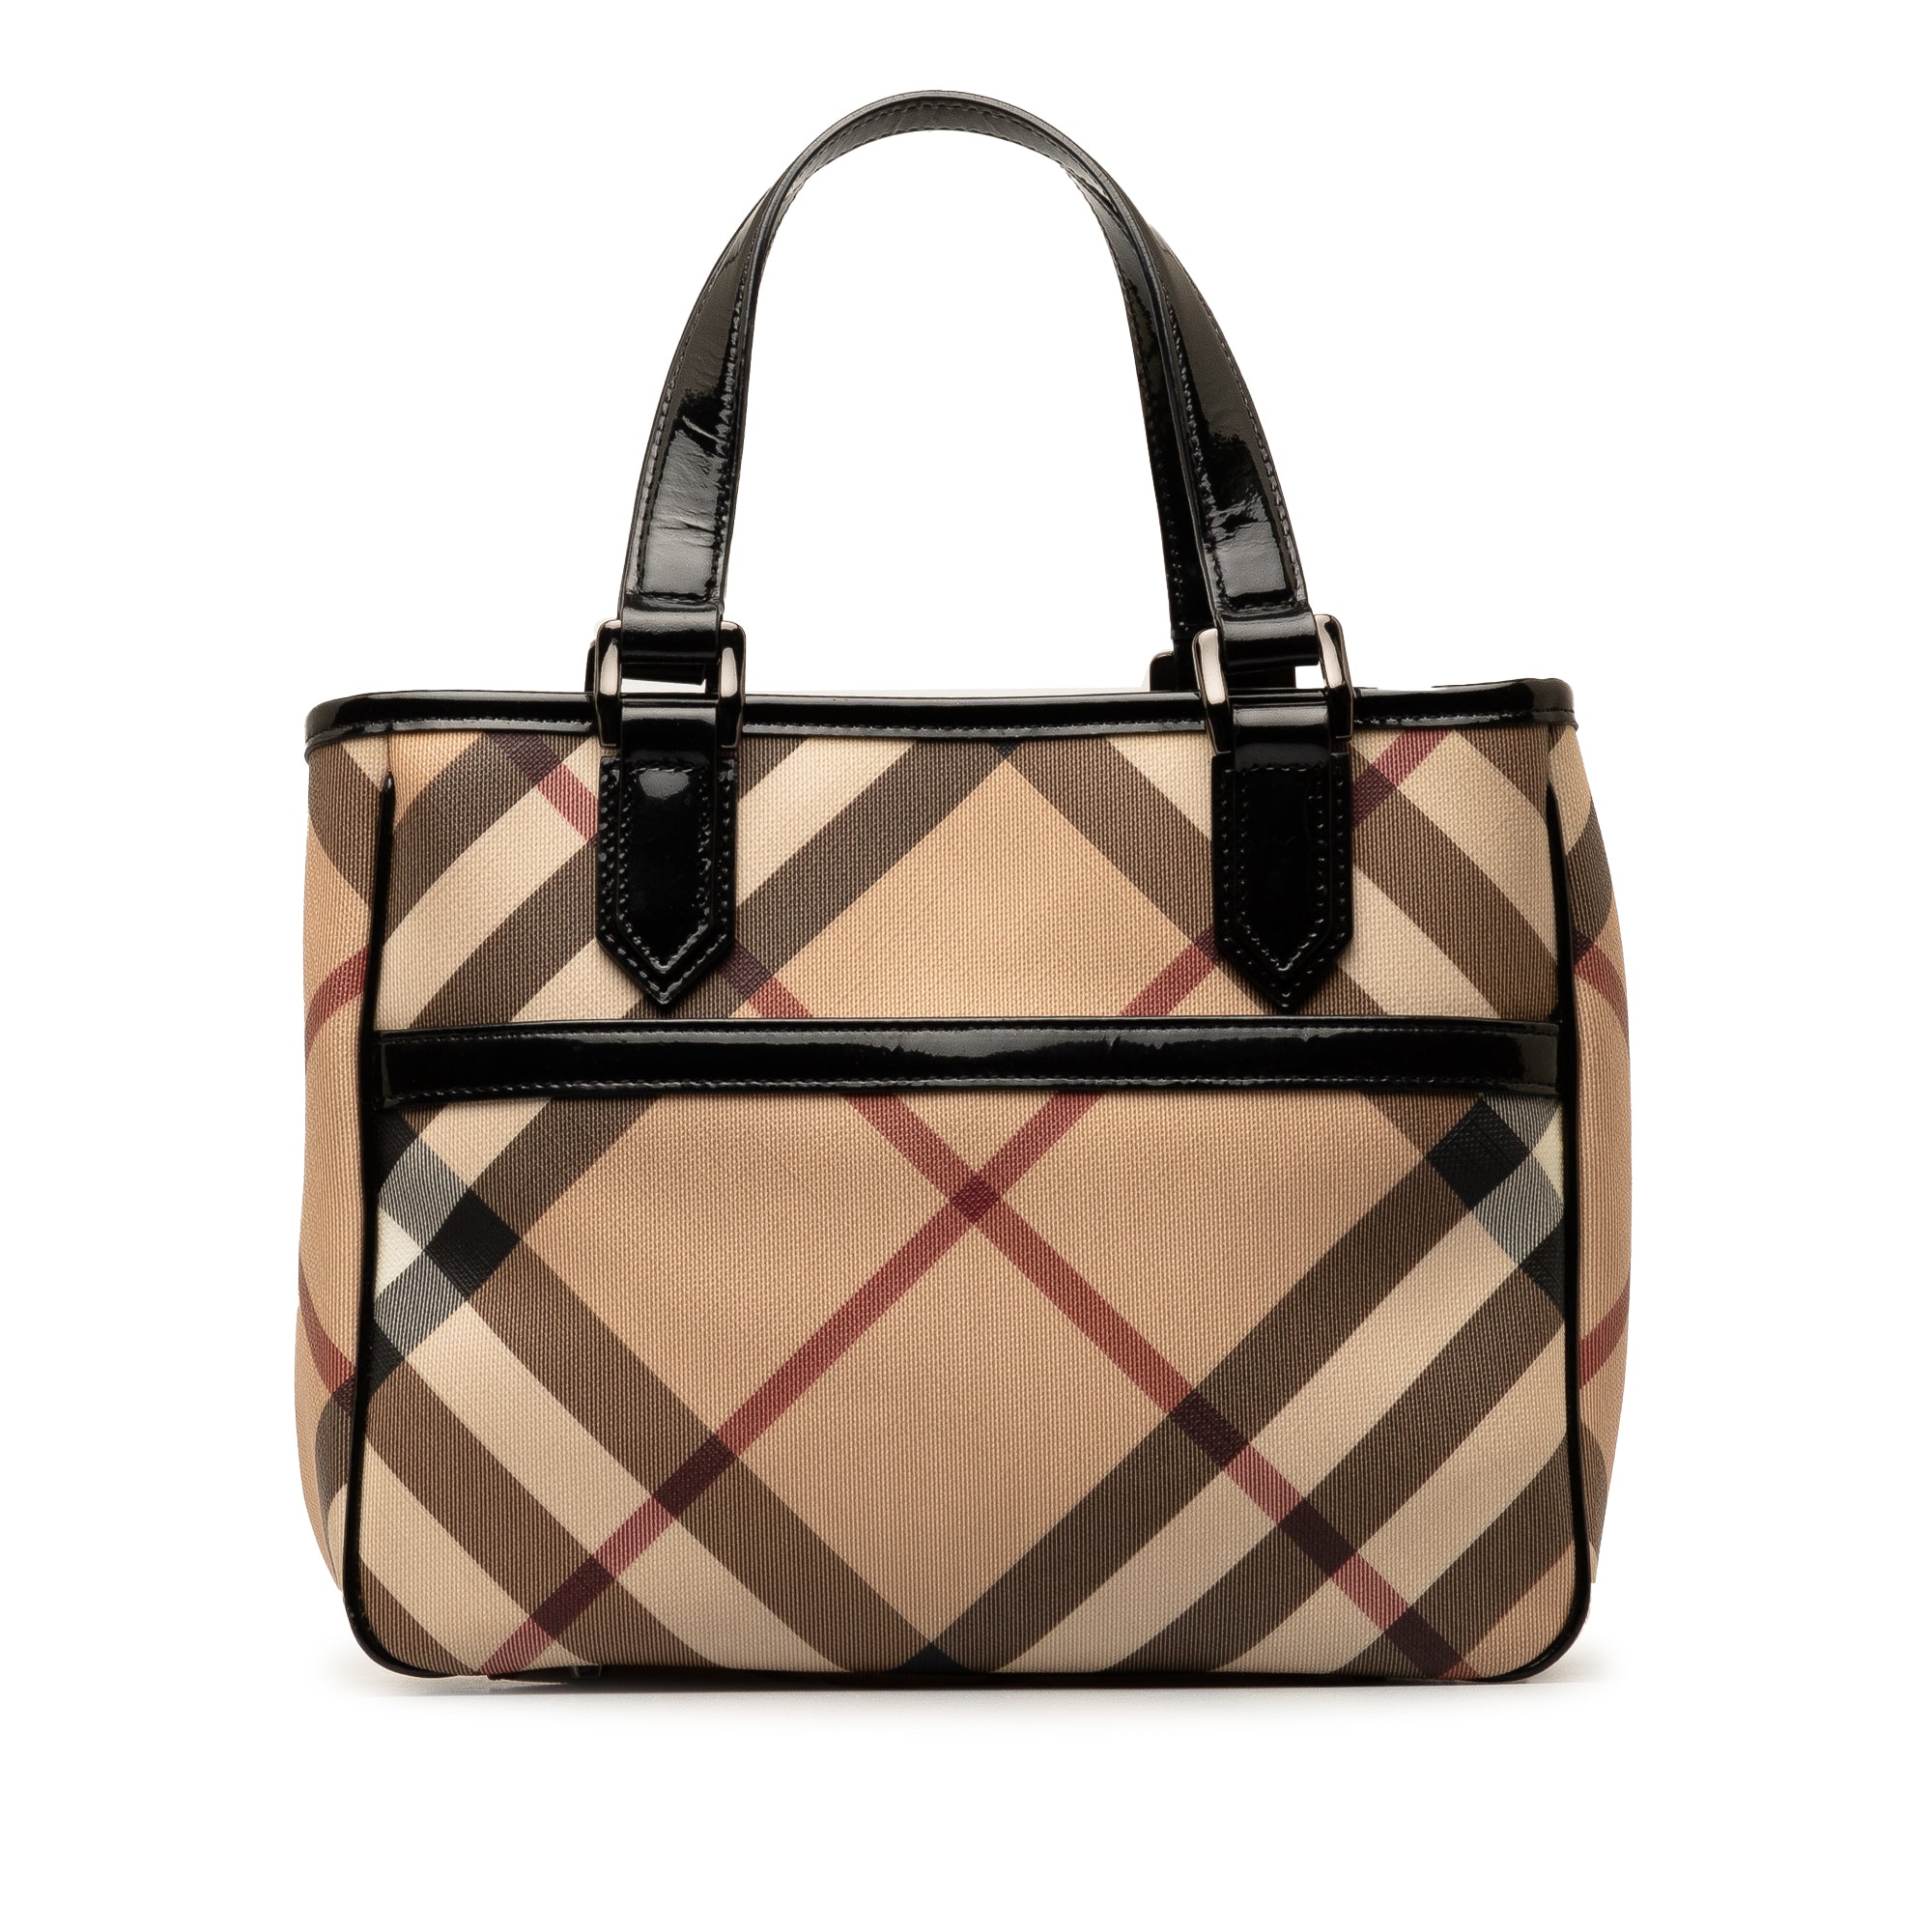 Burberry has seen success recently with